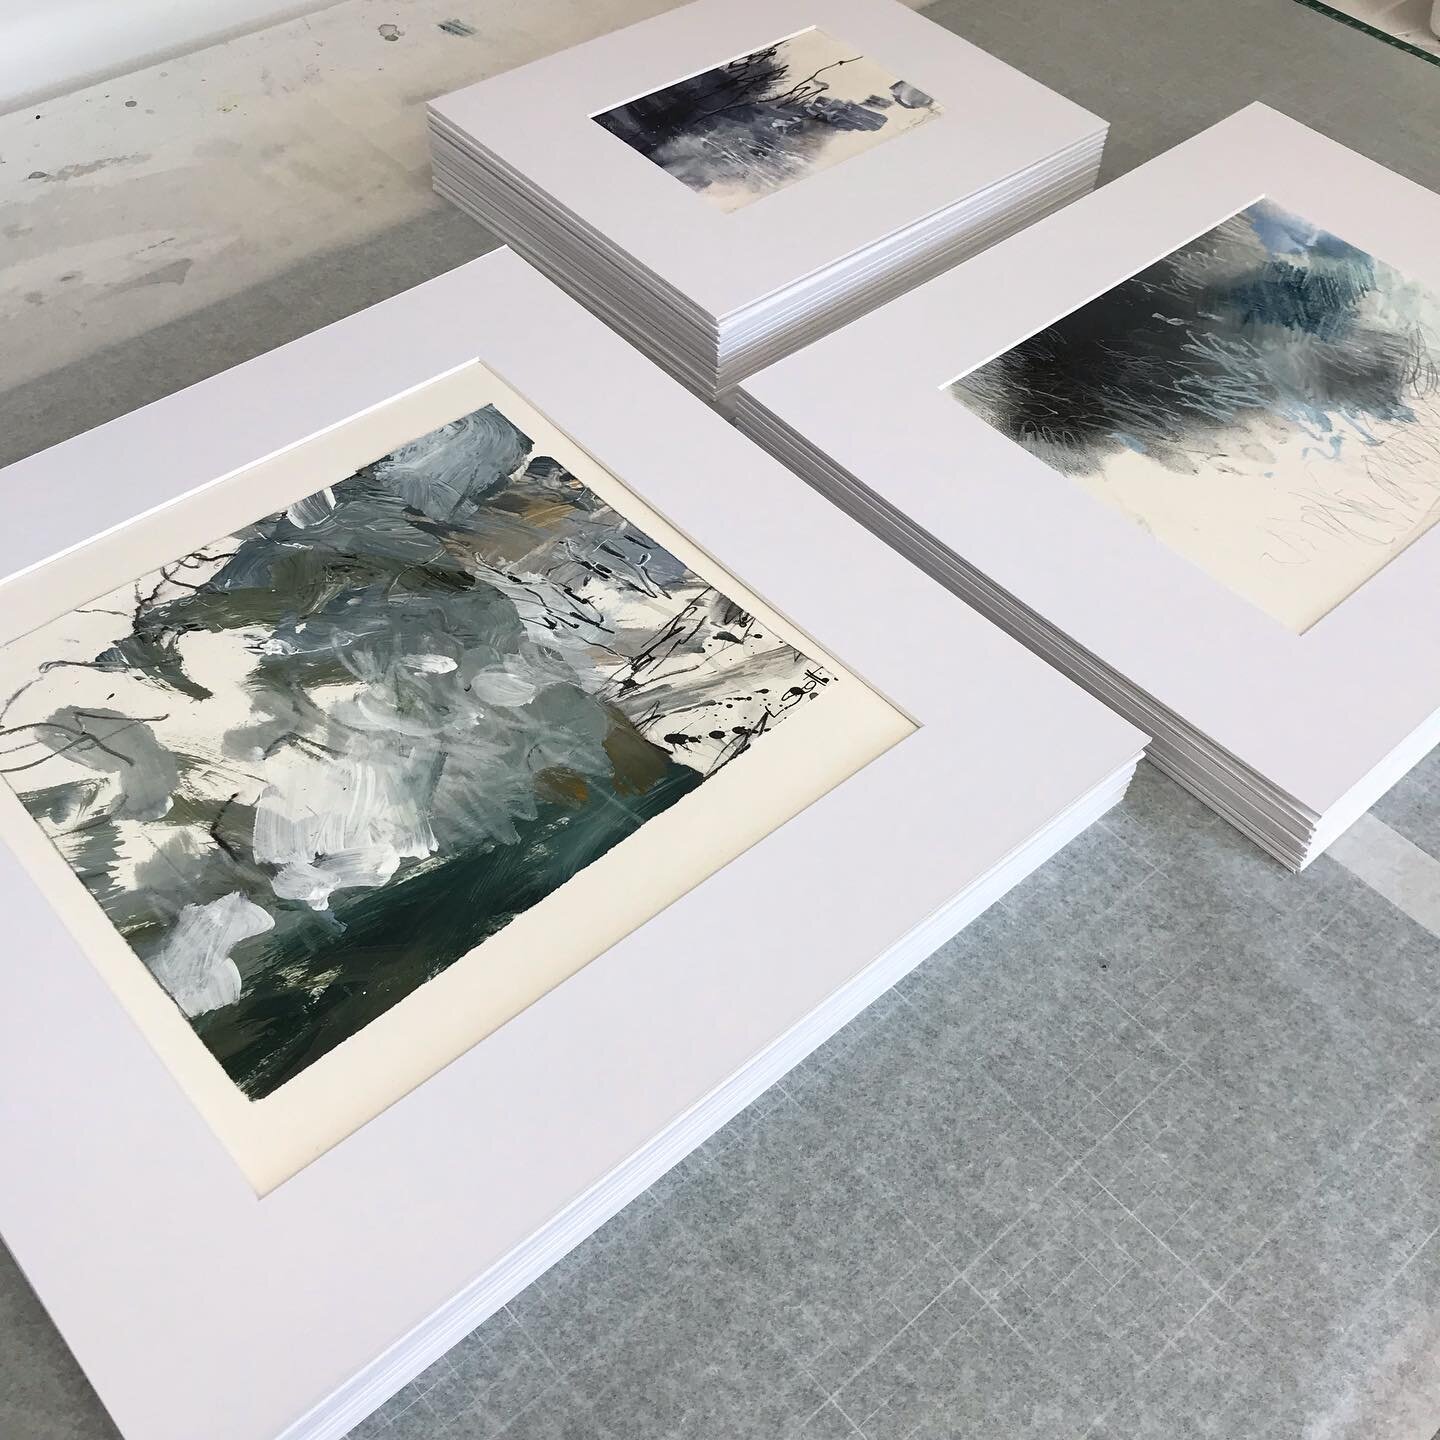 👉🏼 I have to confess it&rsquo;s lovely seeing all of the paper works presented, nice, neat and ready to fly off to potential new homes

👉🏼 It&rsquo;s all coming together, I&rsquo;m just waiting on my paintings to return back from the framer tomor